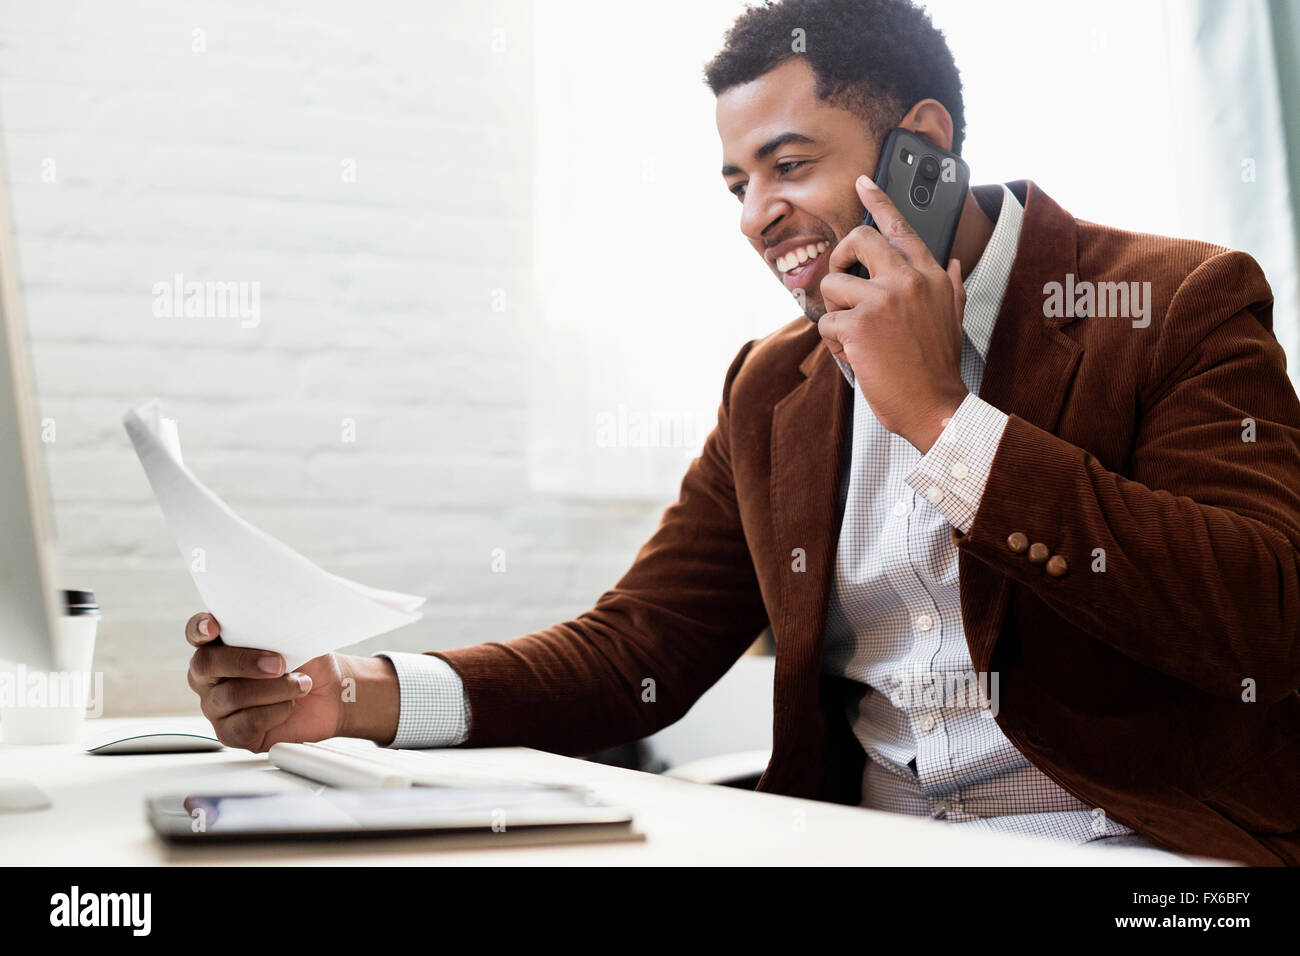 African American businessman talking on cell phone in office Banque D'Images